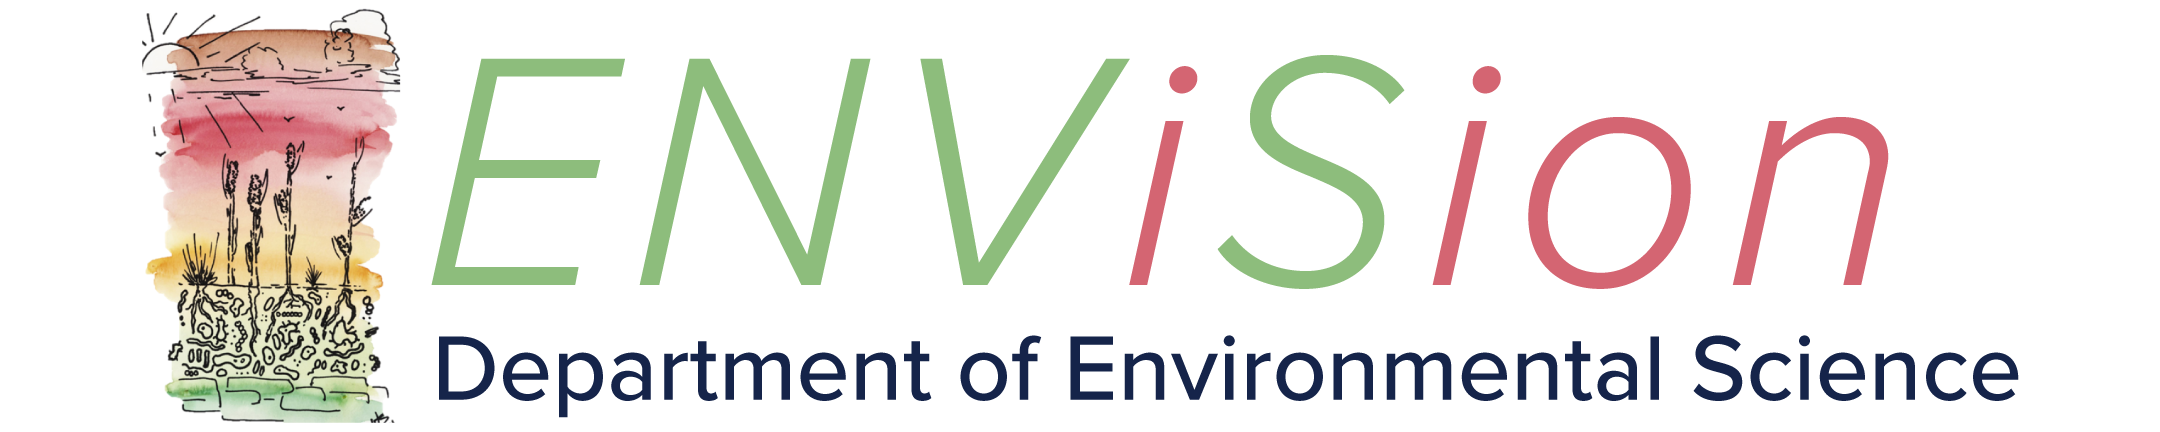 ENViSion spanner for environemntal science earth week event